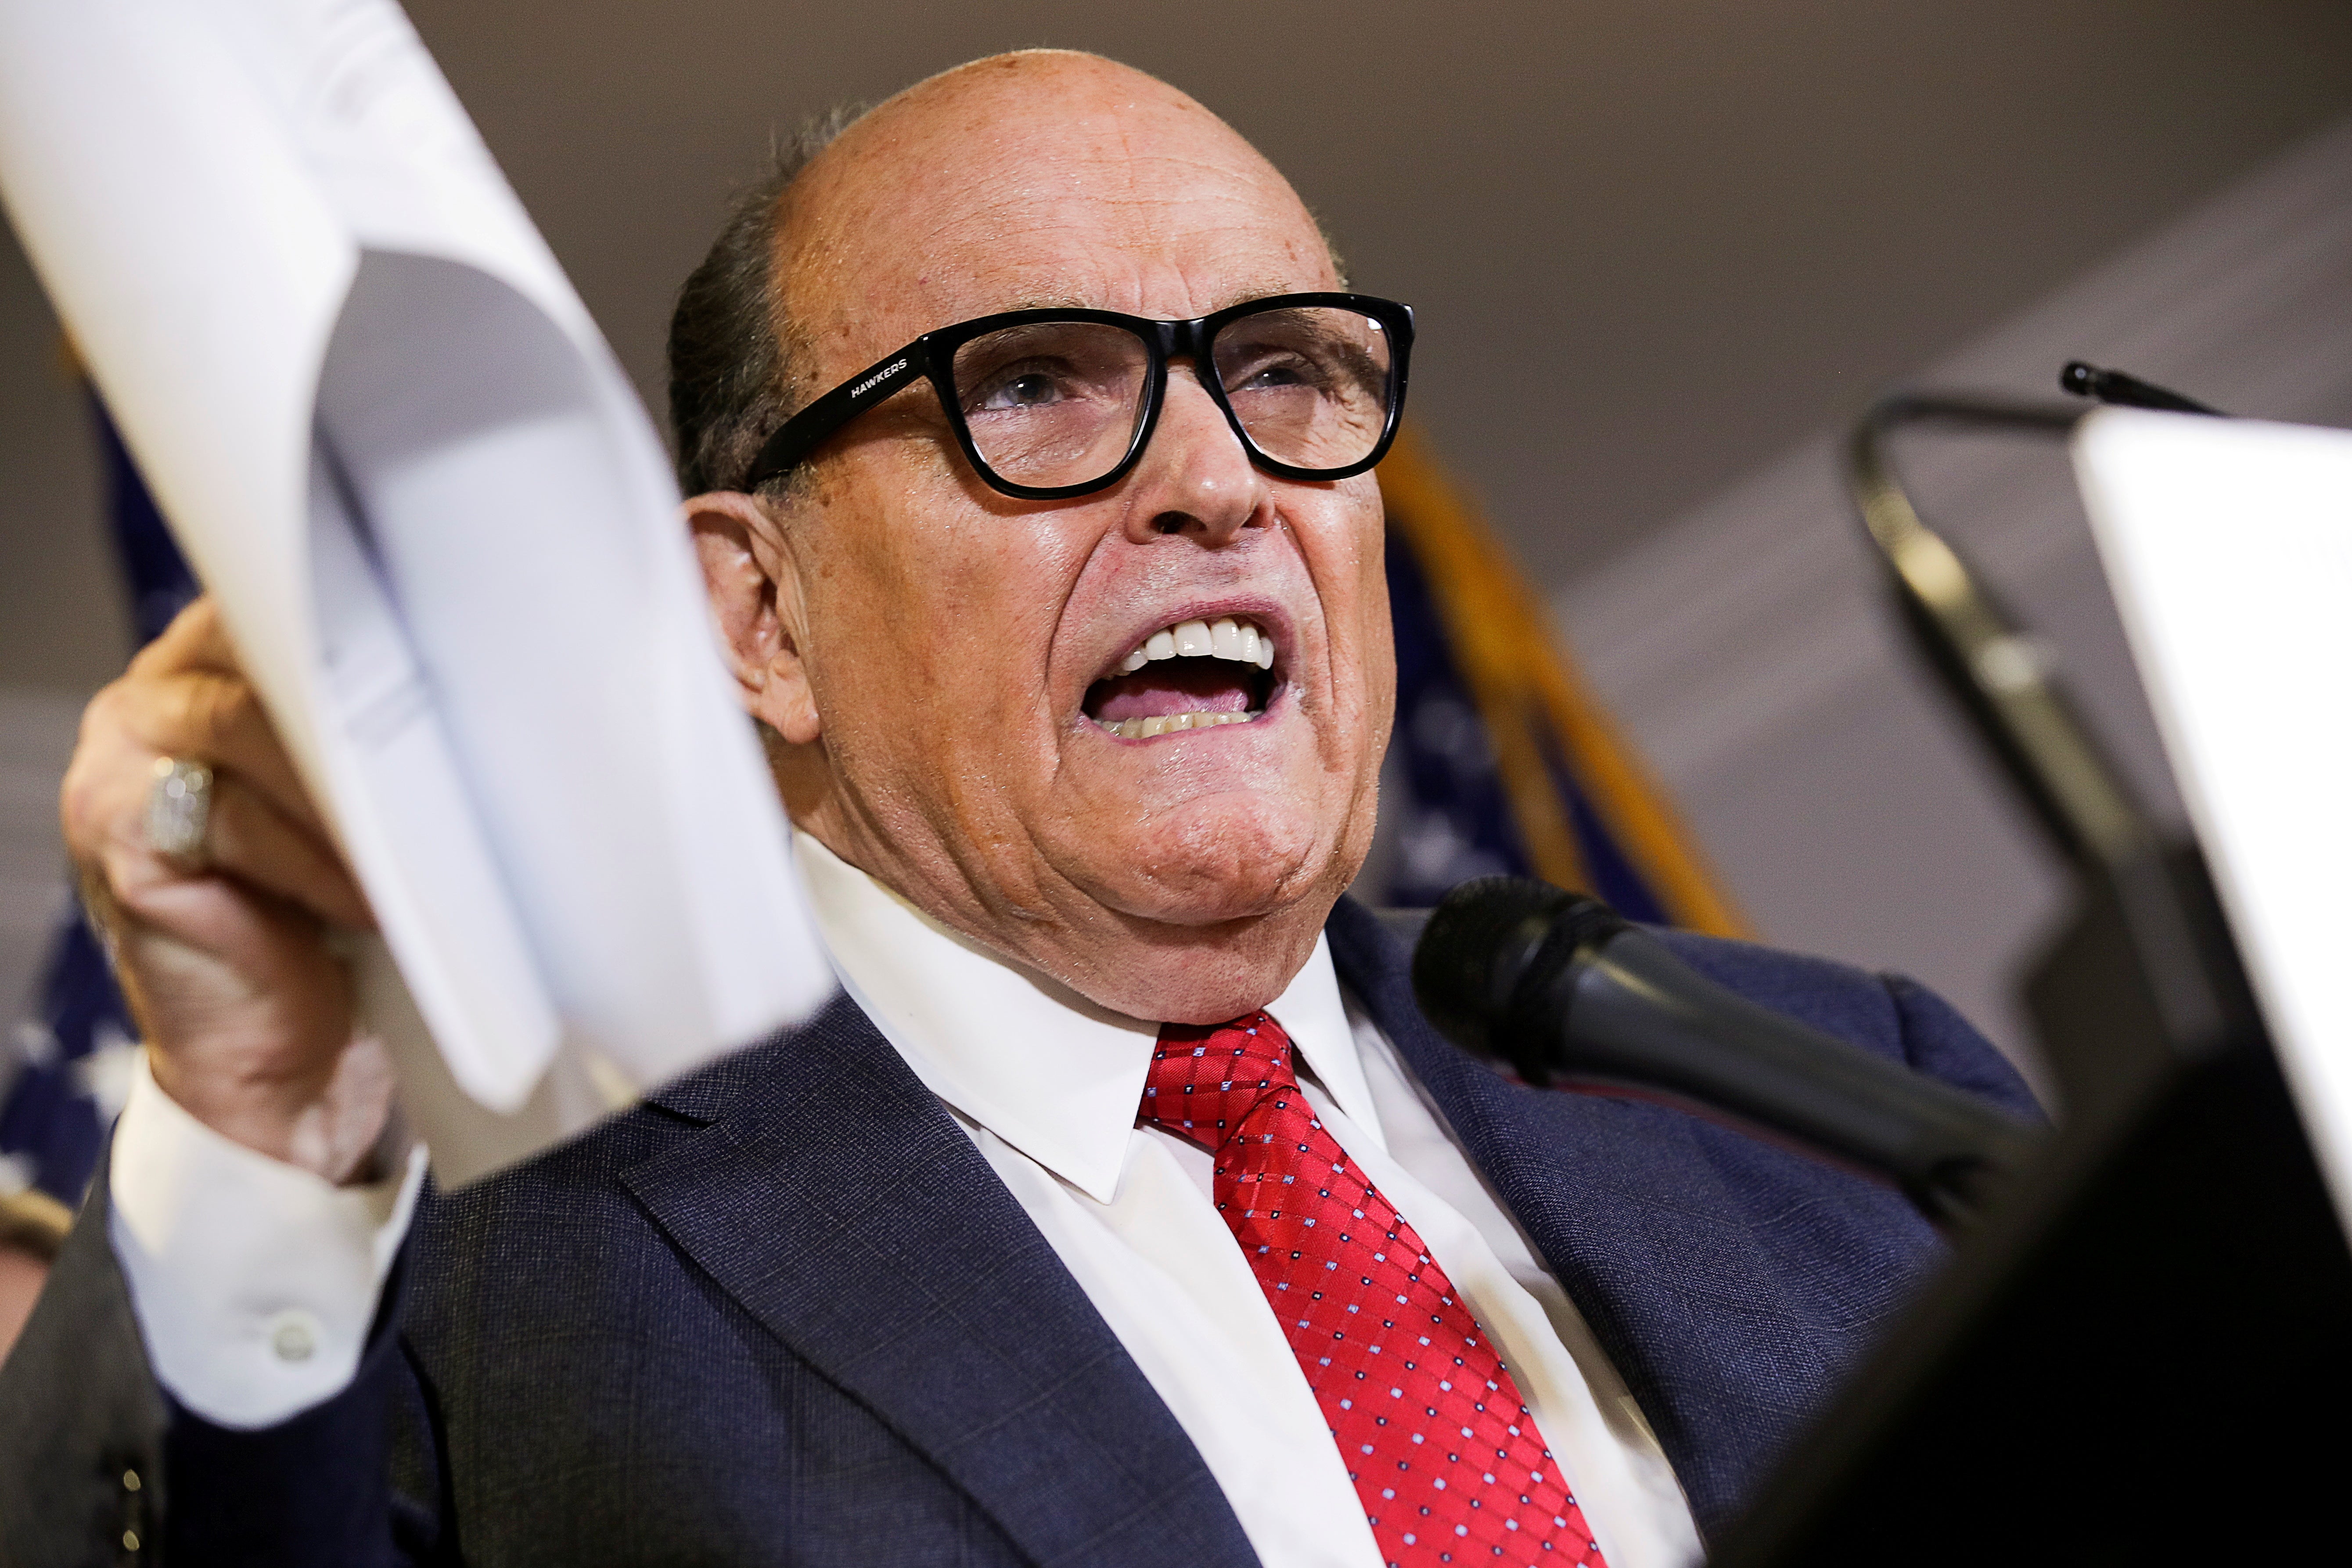 Giuliani speaks at a podium while holding up a packet of papers in one hand